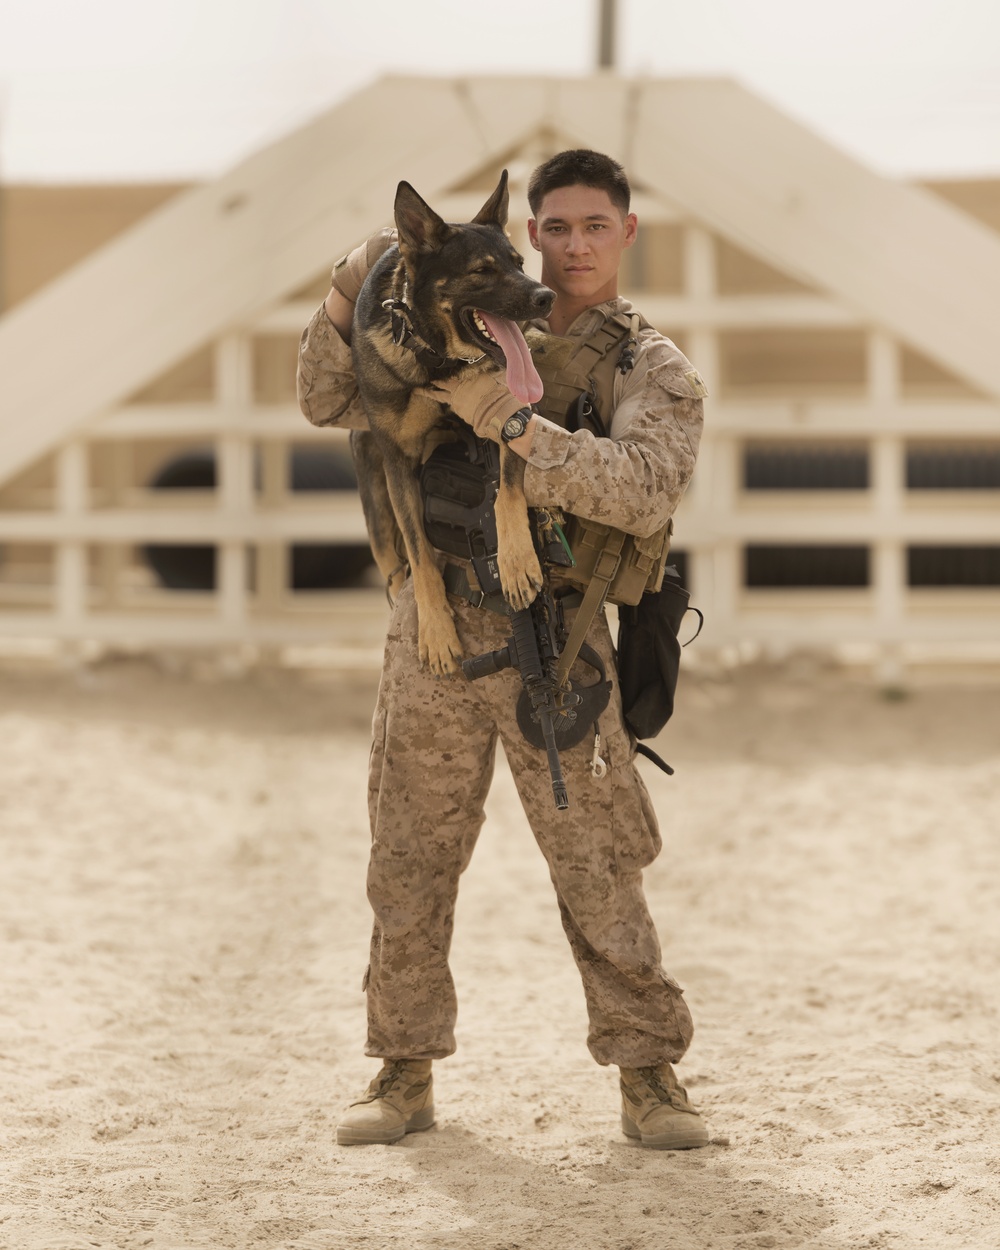 Phoenix, Ariz. native reflects on what his military working dog has taught him